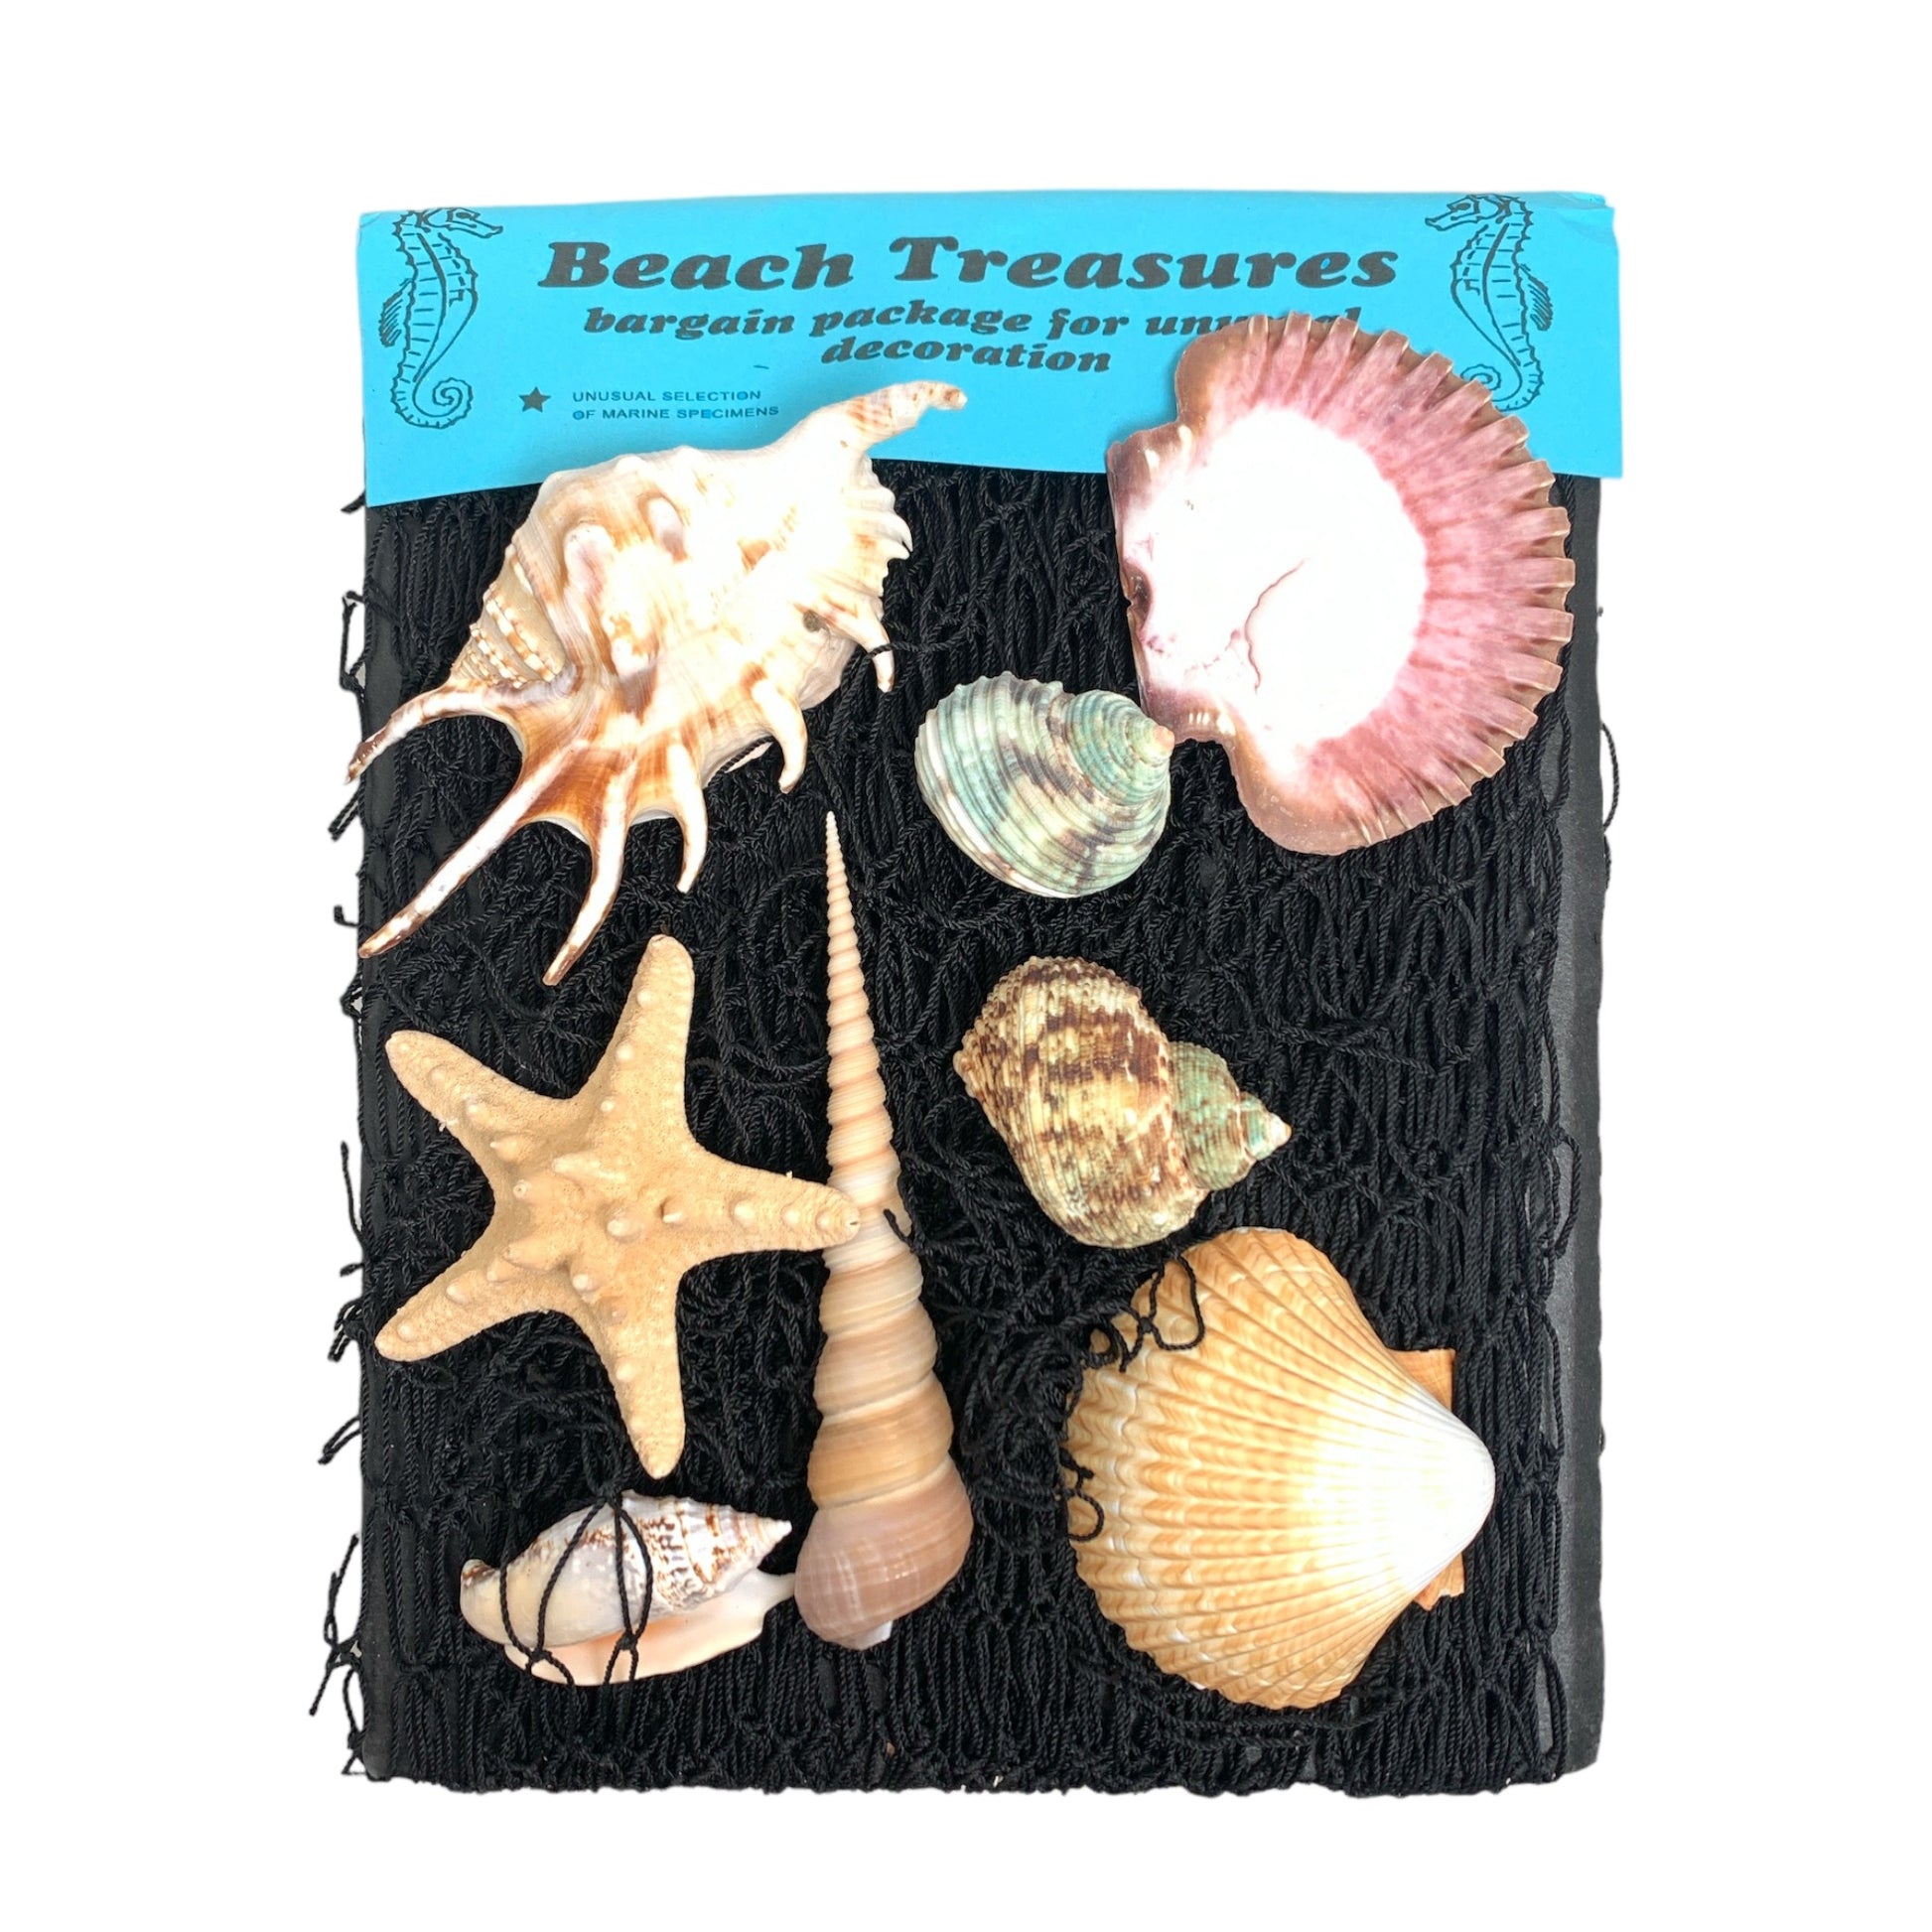 BEACHCOMBER DECOR KIT - SMALL WITH 5 x 7 FISHING NET AND SHELLS